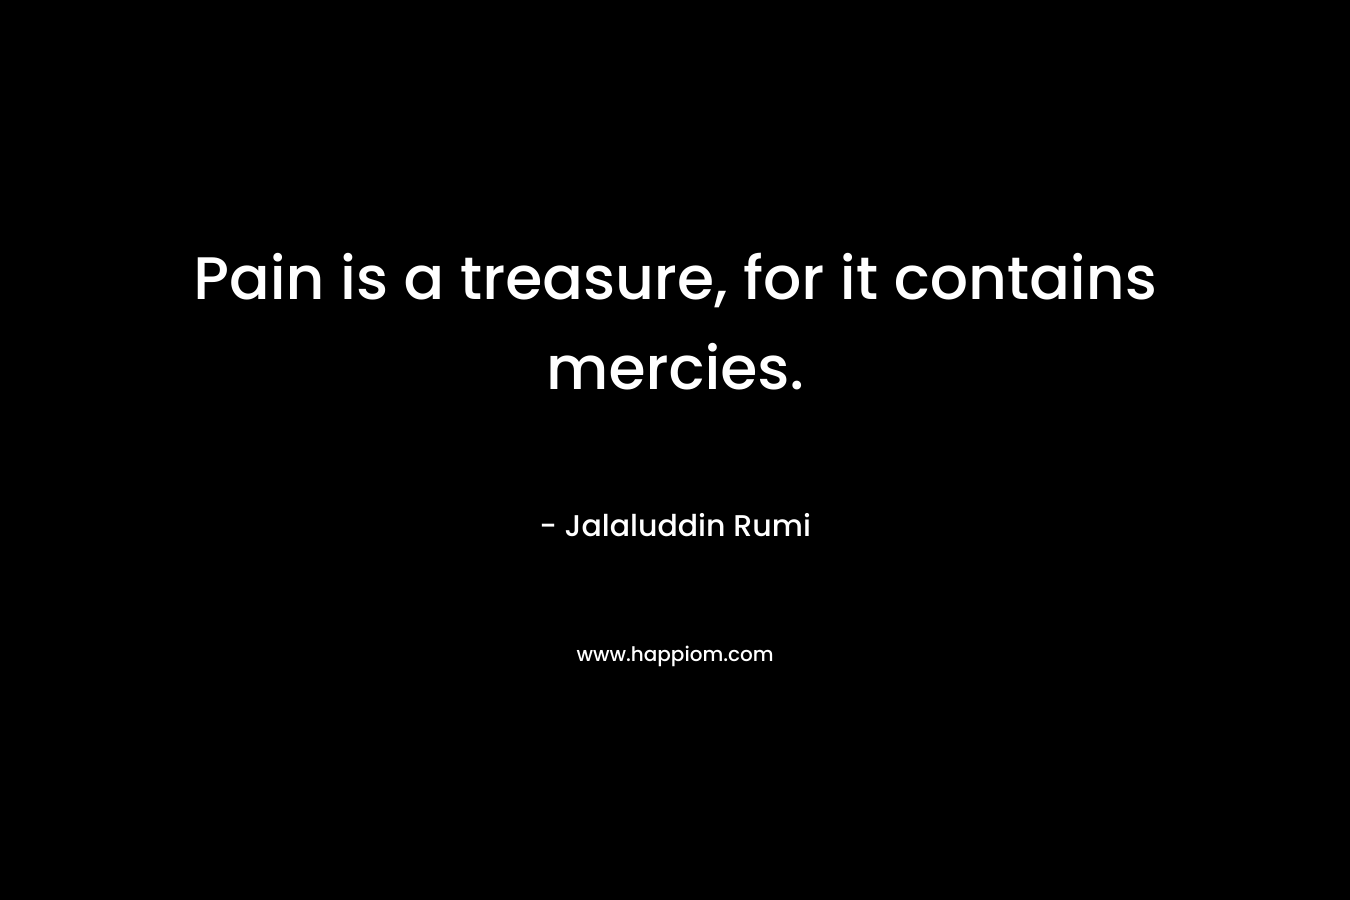 Pain is a treasure, for it contains mercies.